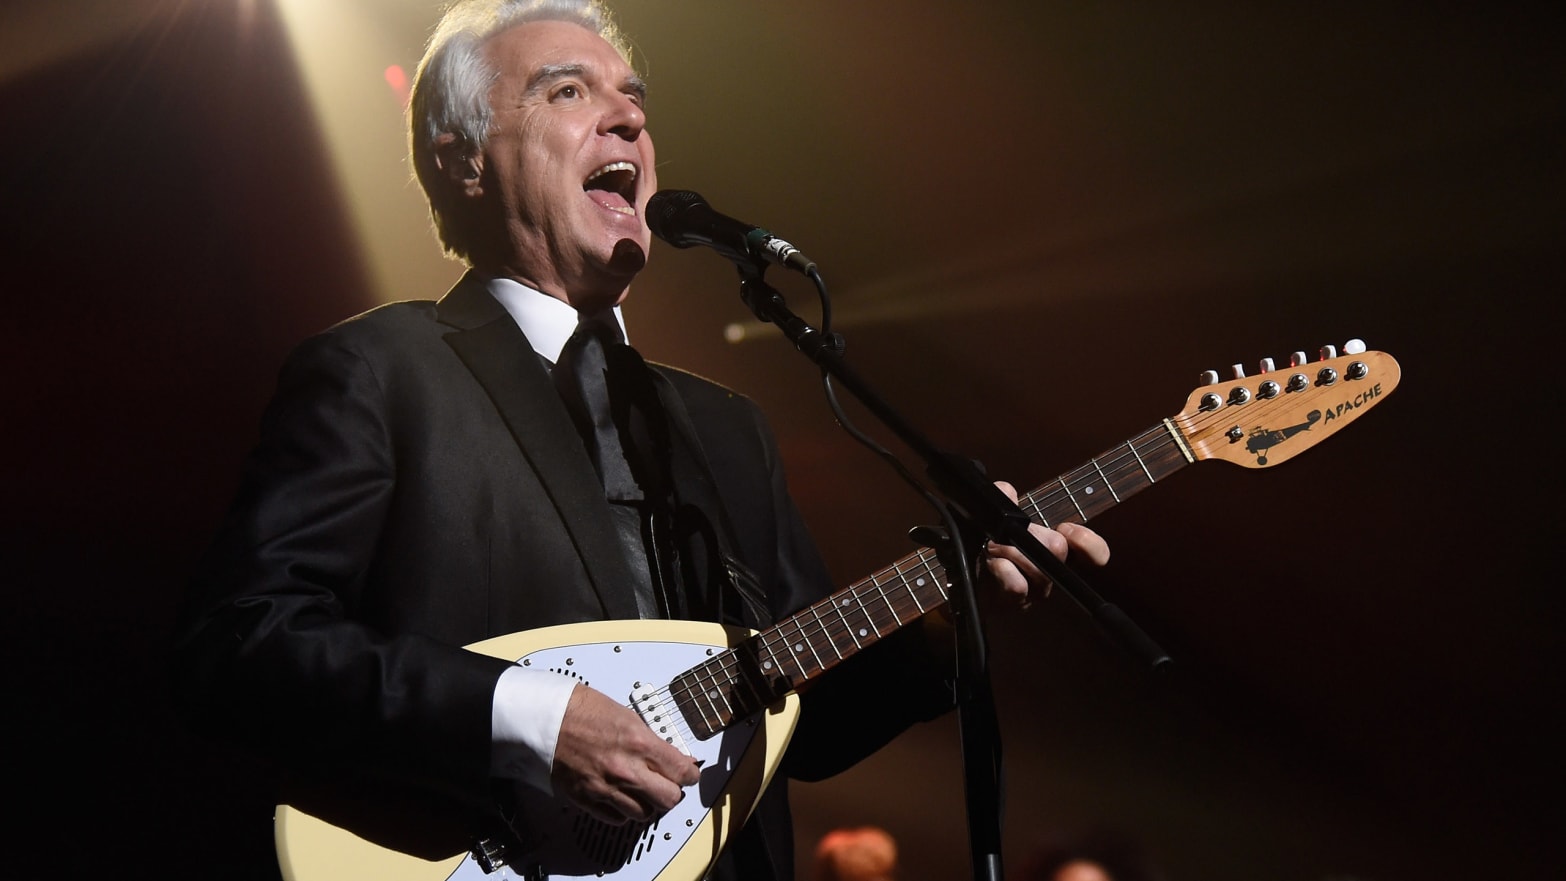 David Byrne performs onstage during Keep A Child Alive's 11th Annual Black Ball